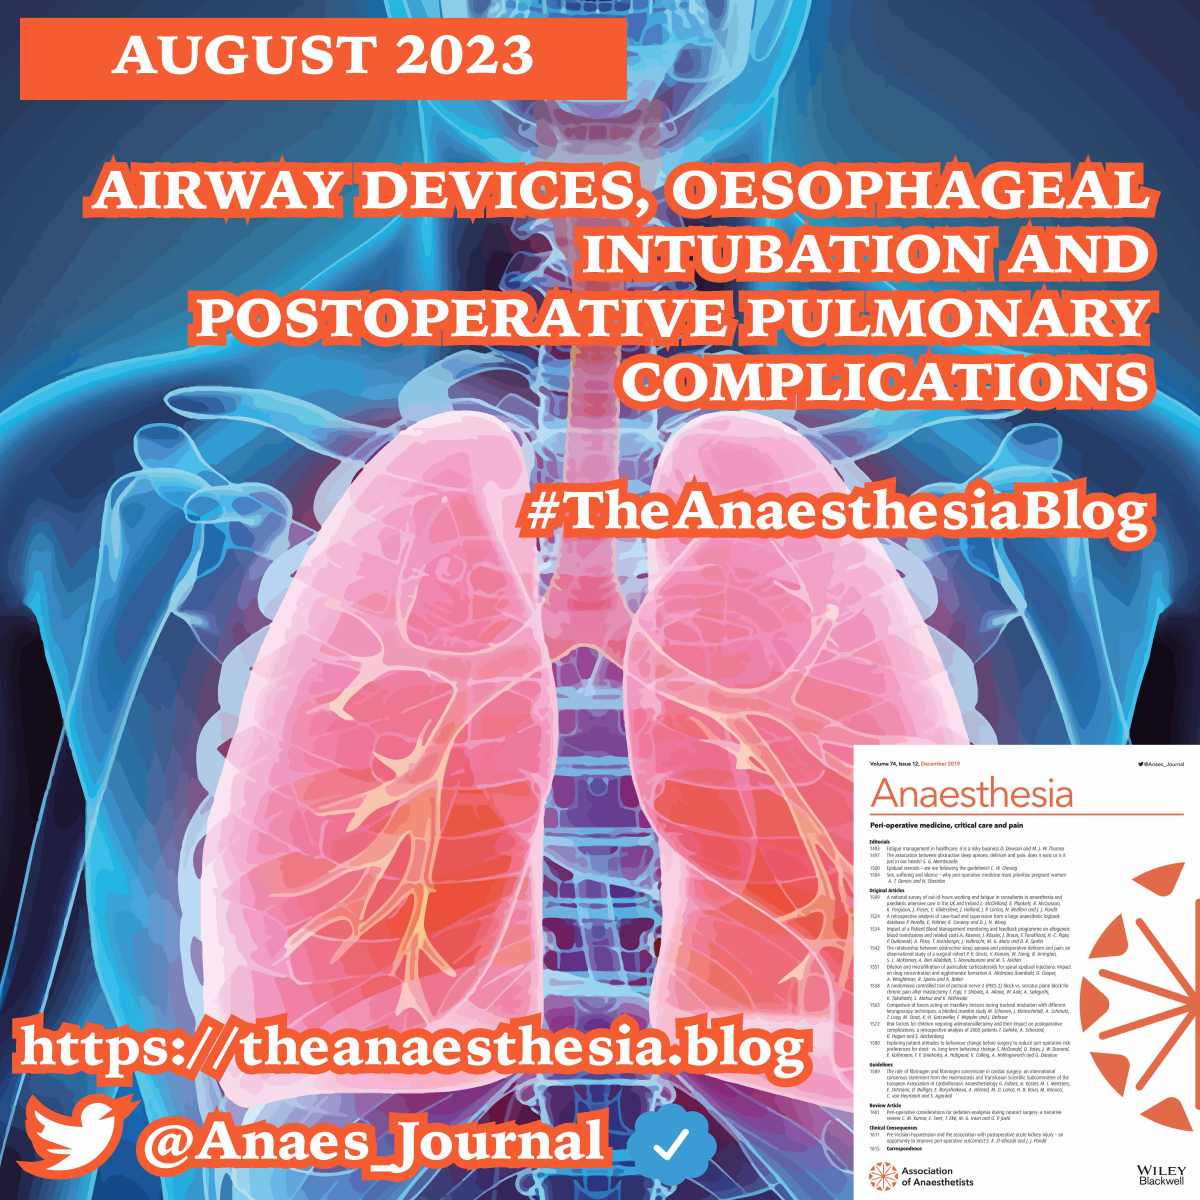 Airway devices, oesophageal intubation and postoperative pulmonary complications